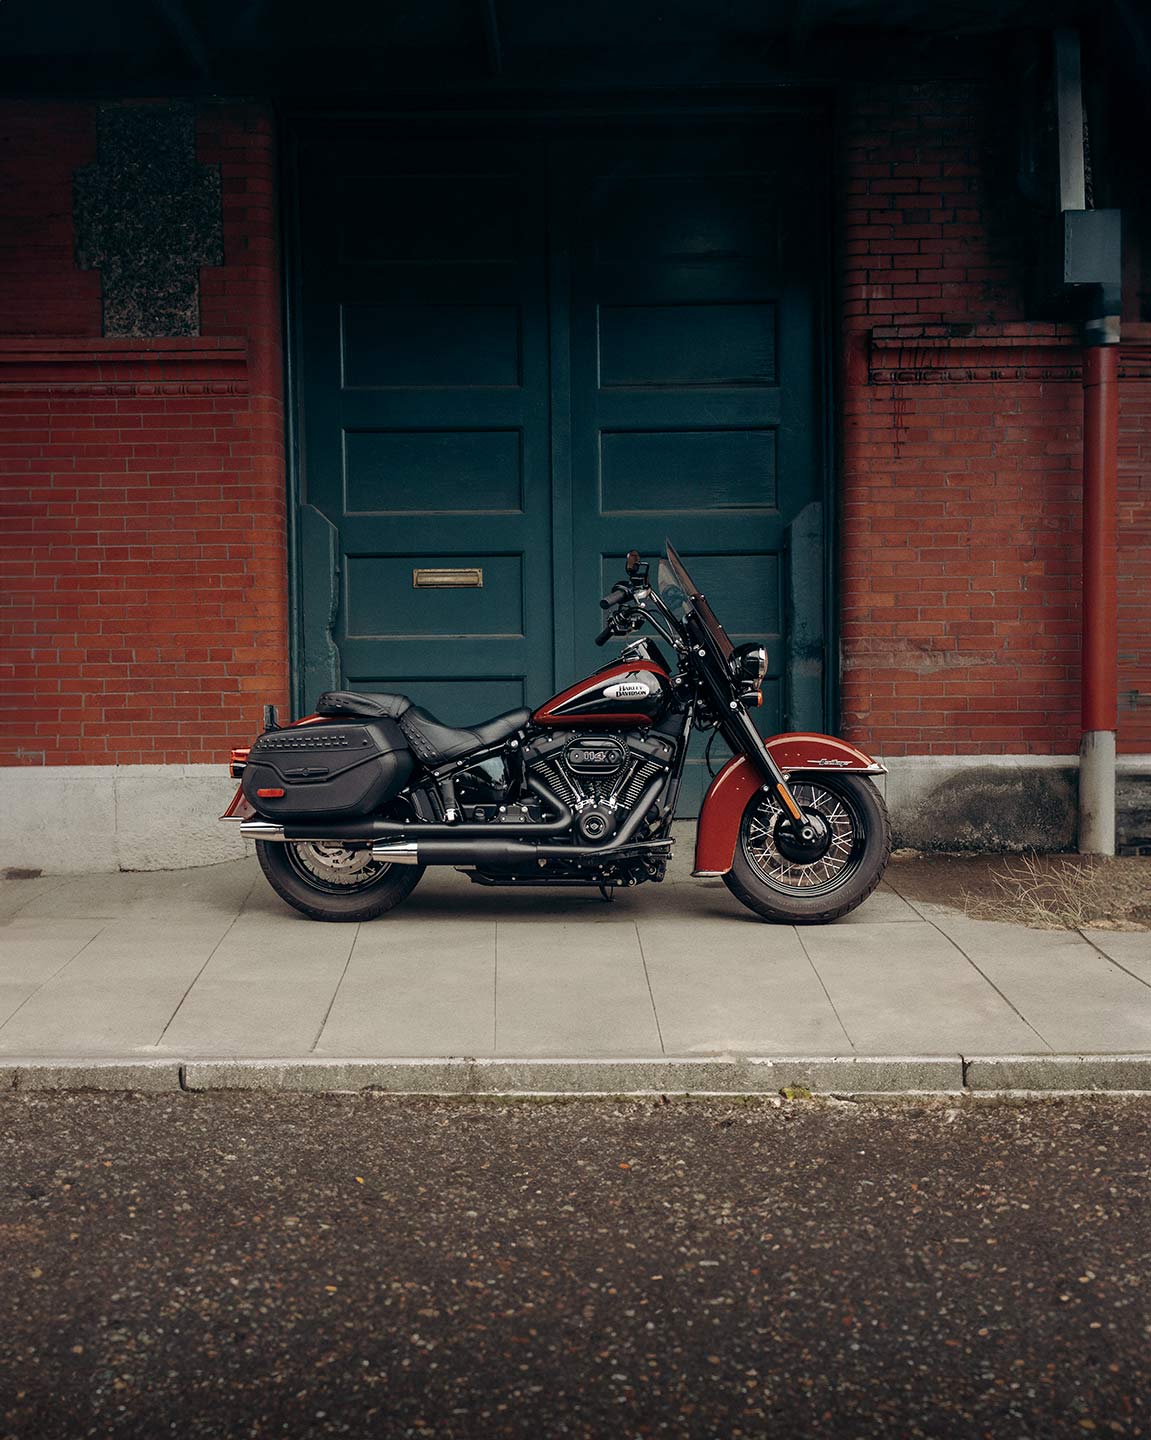 The marriage of the classic two-tone paint job and the blacked-out trim accentuates the retro-modern balance that the Heritage Classic excels at achieving.